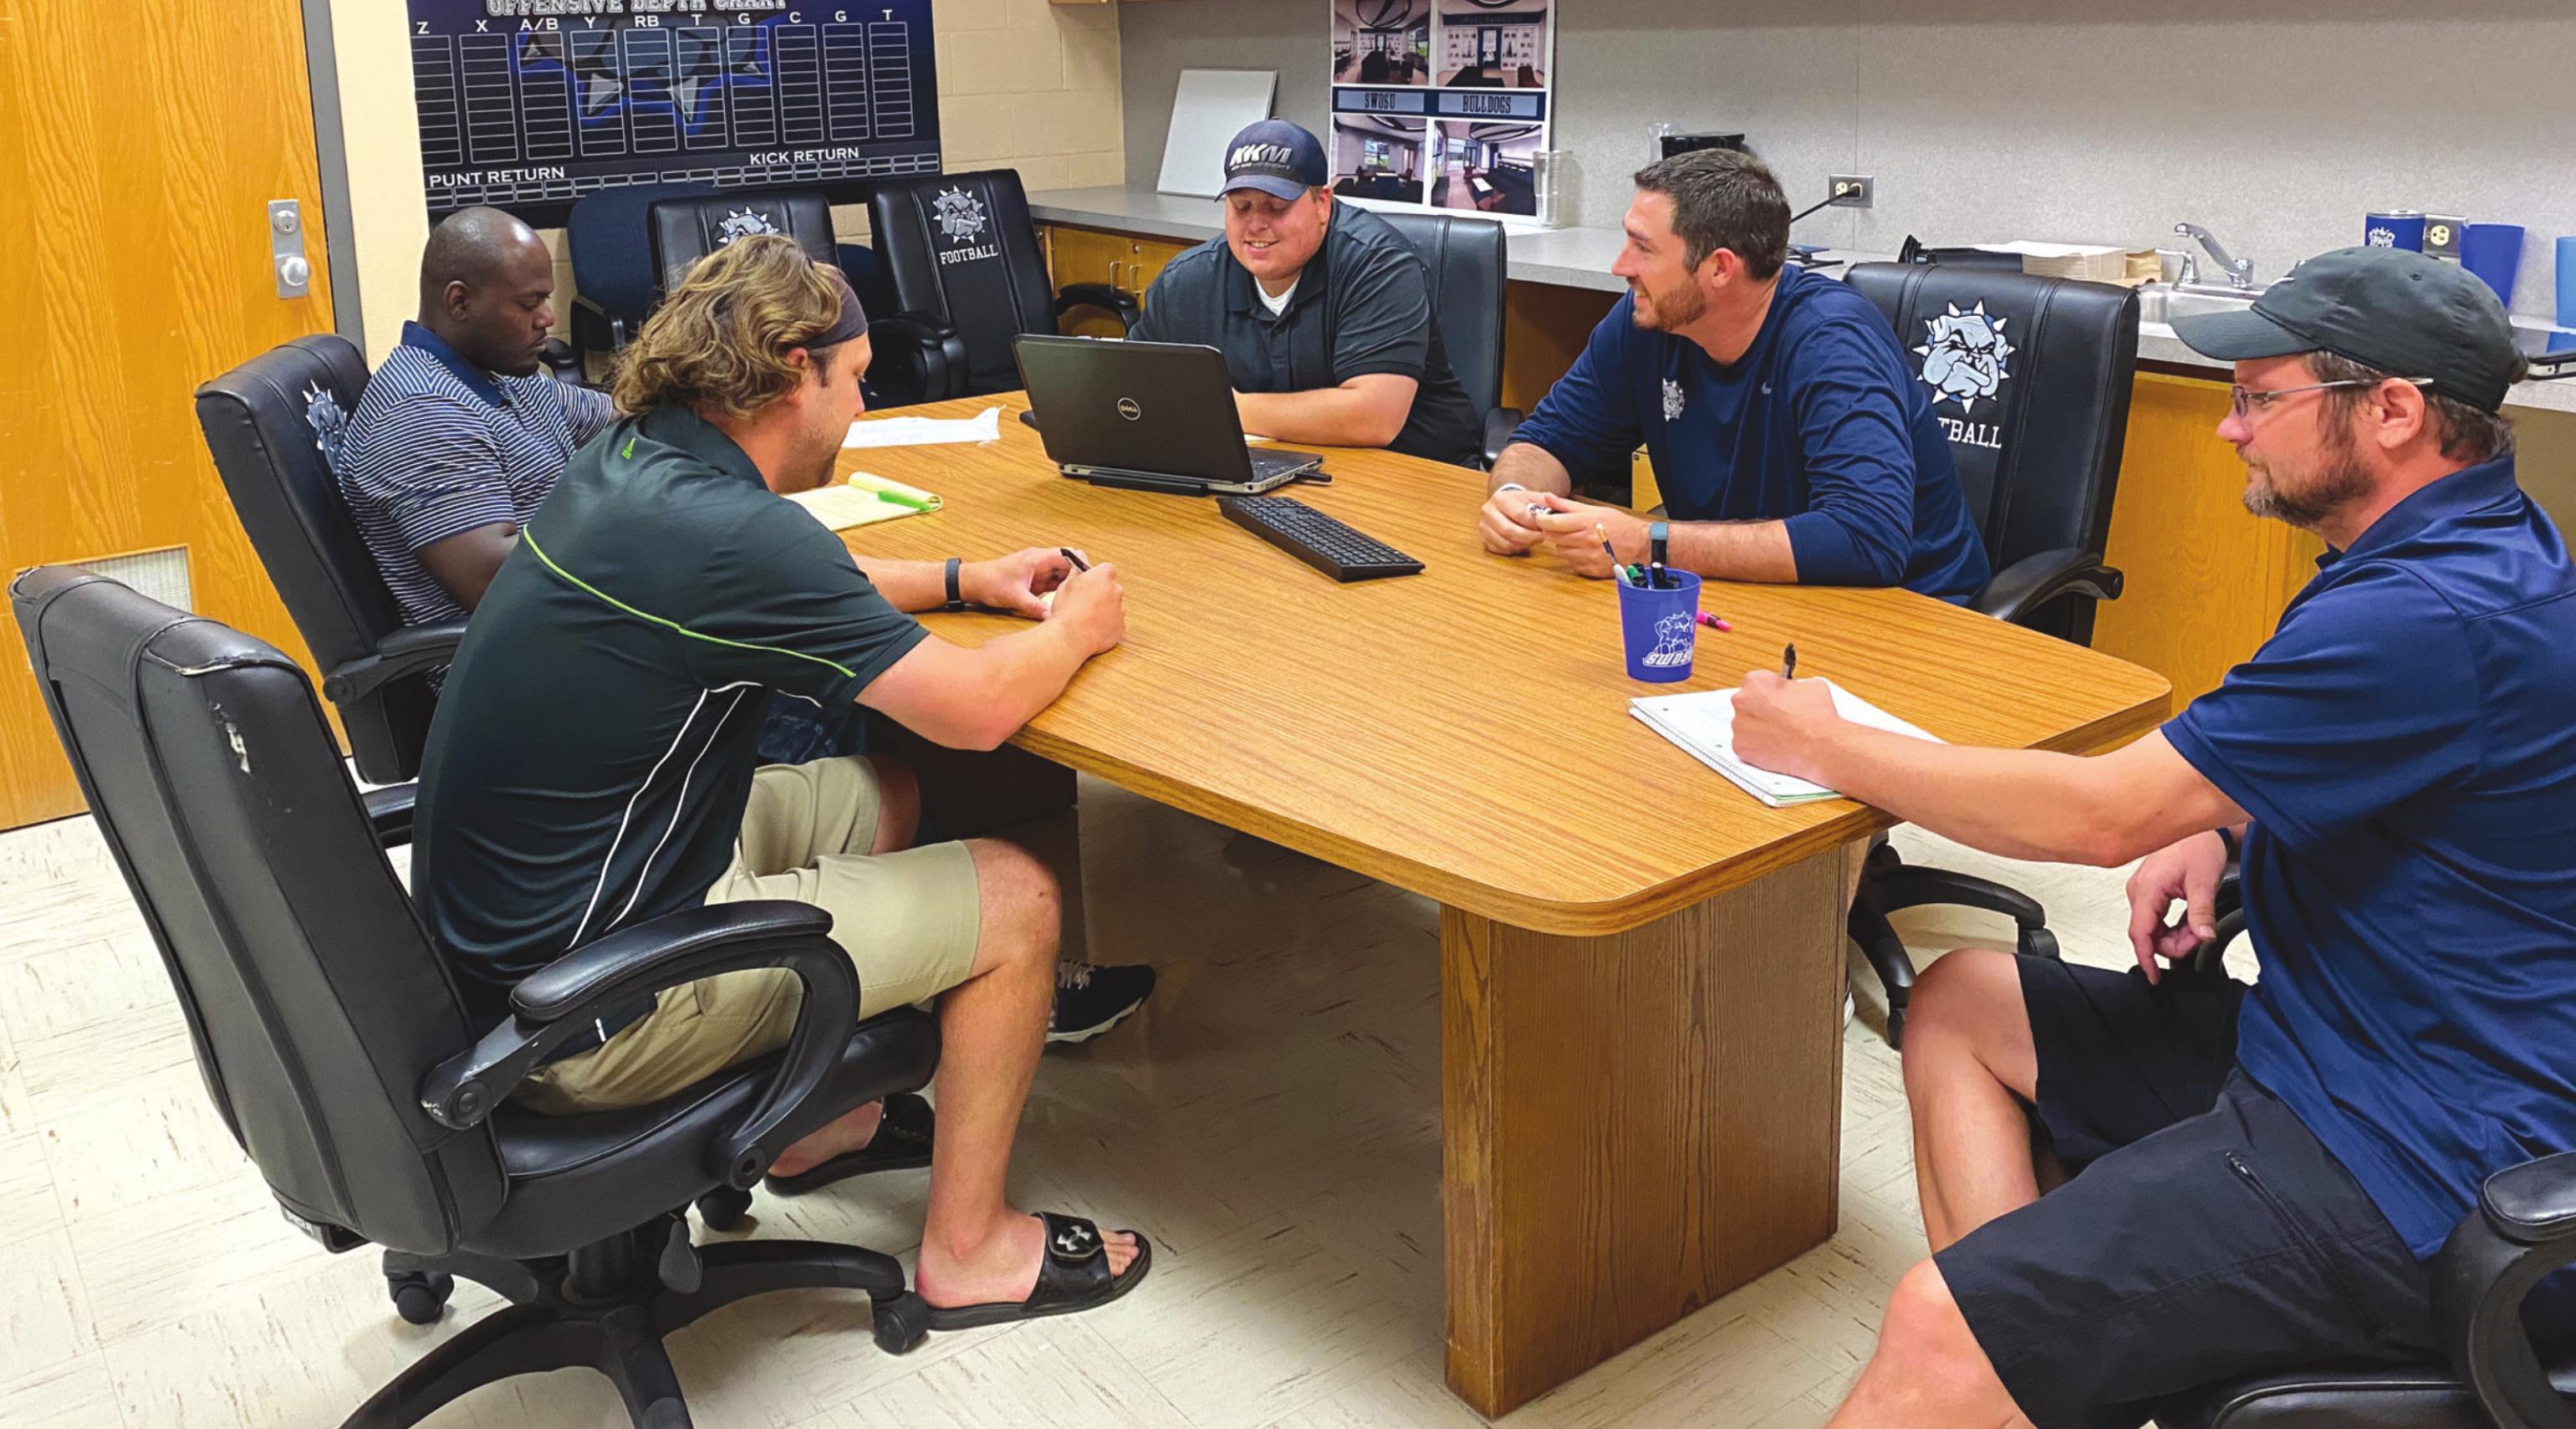 SWOSU football coaches Ruzell McCoy, Tyler Hennes, Jake Warehime, Colin MaQuillan and coach Chet Pobolish discus plans and protocols for COVID-19. Josh Jennings/WDN